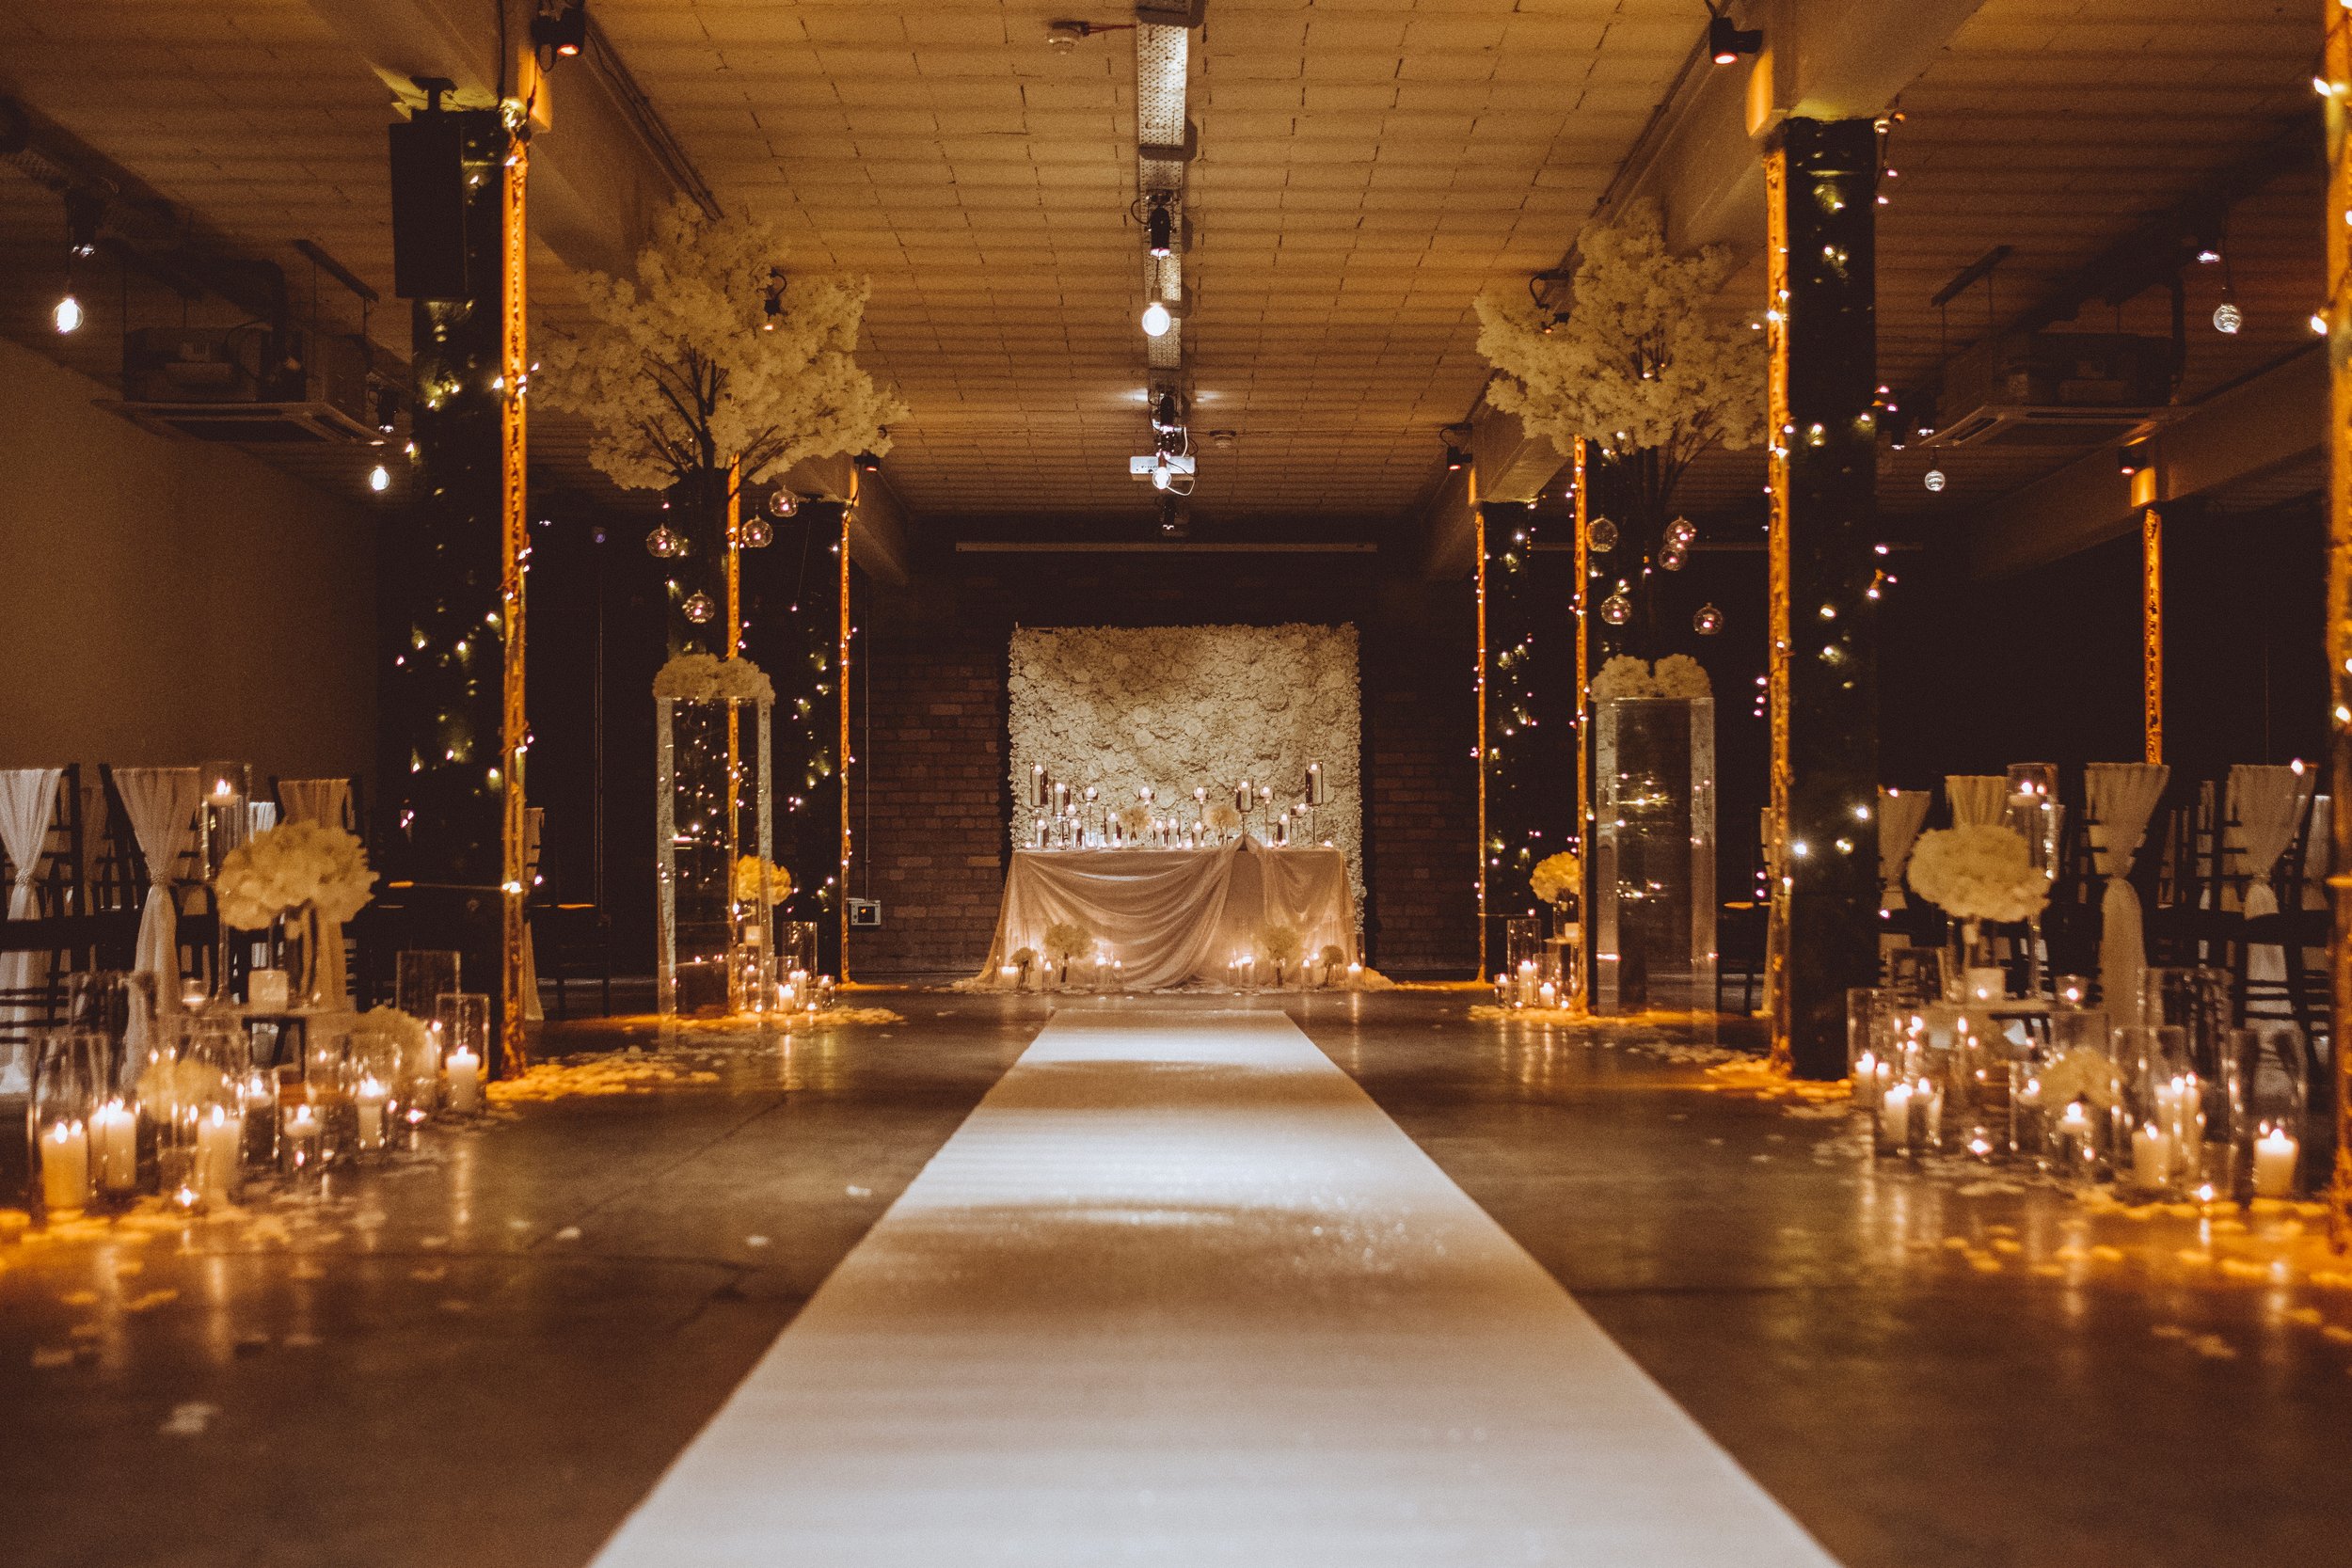  Photographer Credit: Dorian Knightley  A beautiful view of the wedding aisle leading up to the alter, set up inside the Victoria Warehouse.   There is a long cream runner on the floor down the aisle with pillar candles in storm vases grouped togethe